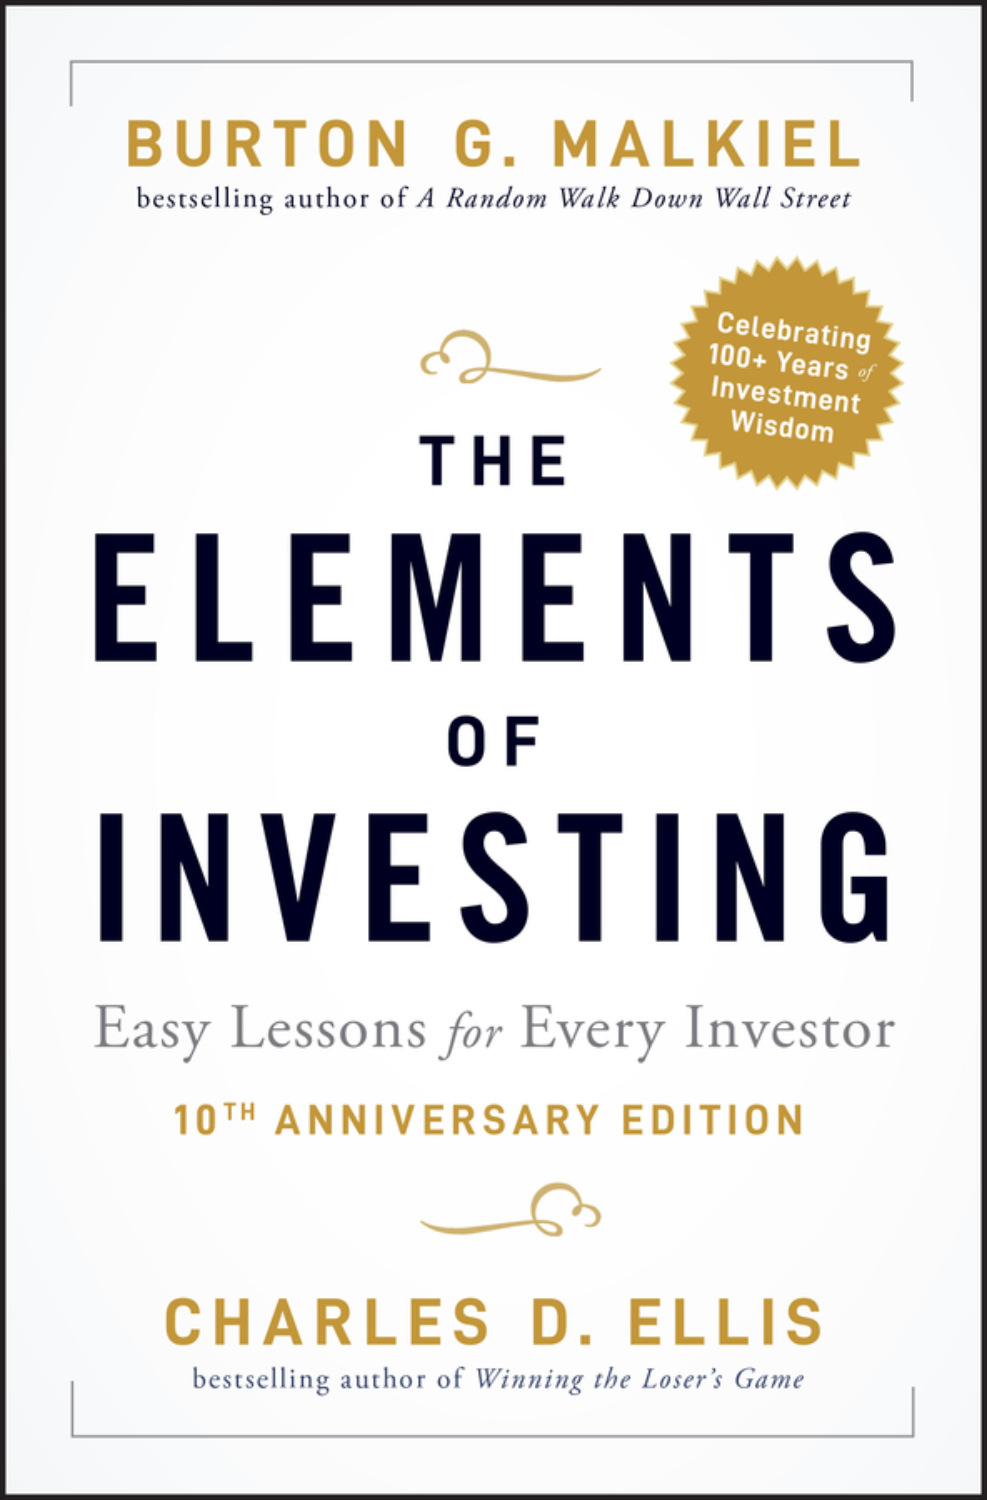 the elements of investing by malkiel and ellis pdf printer